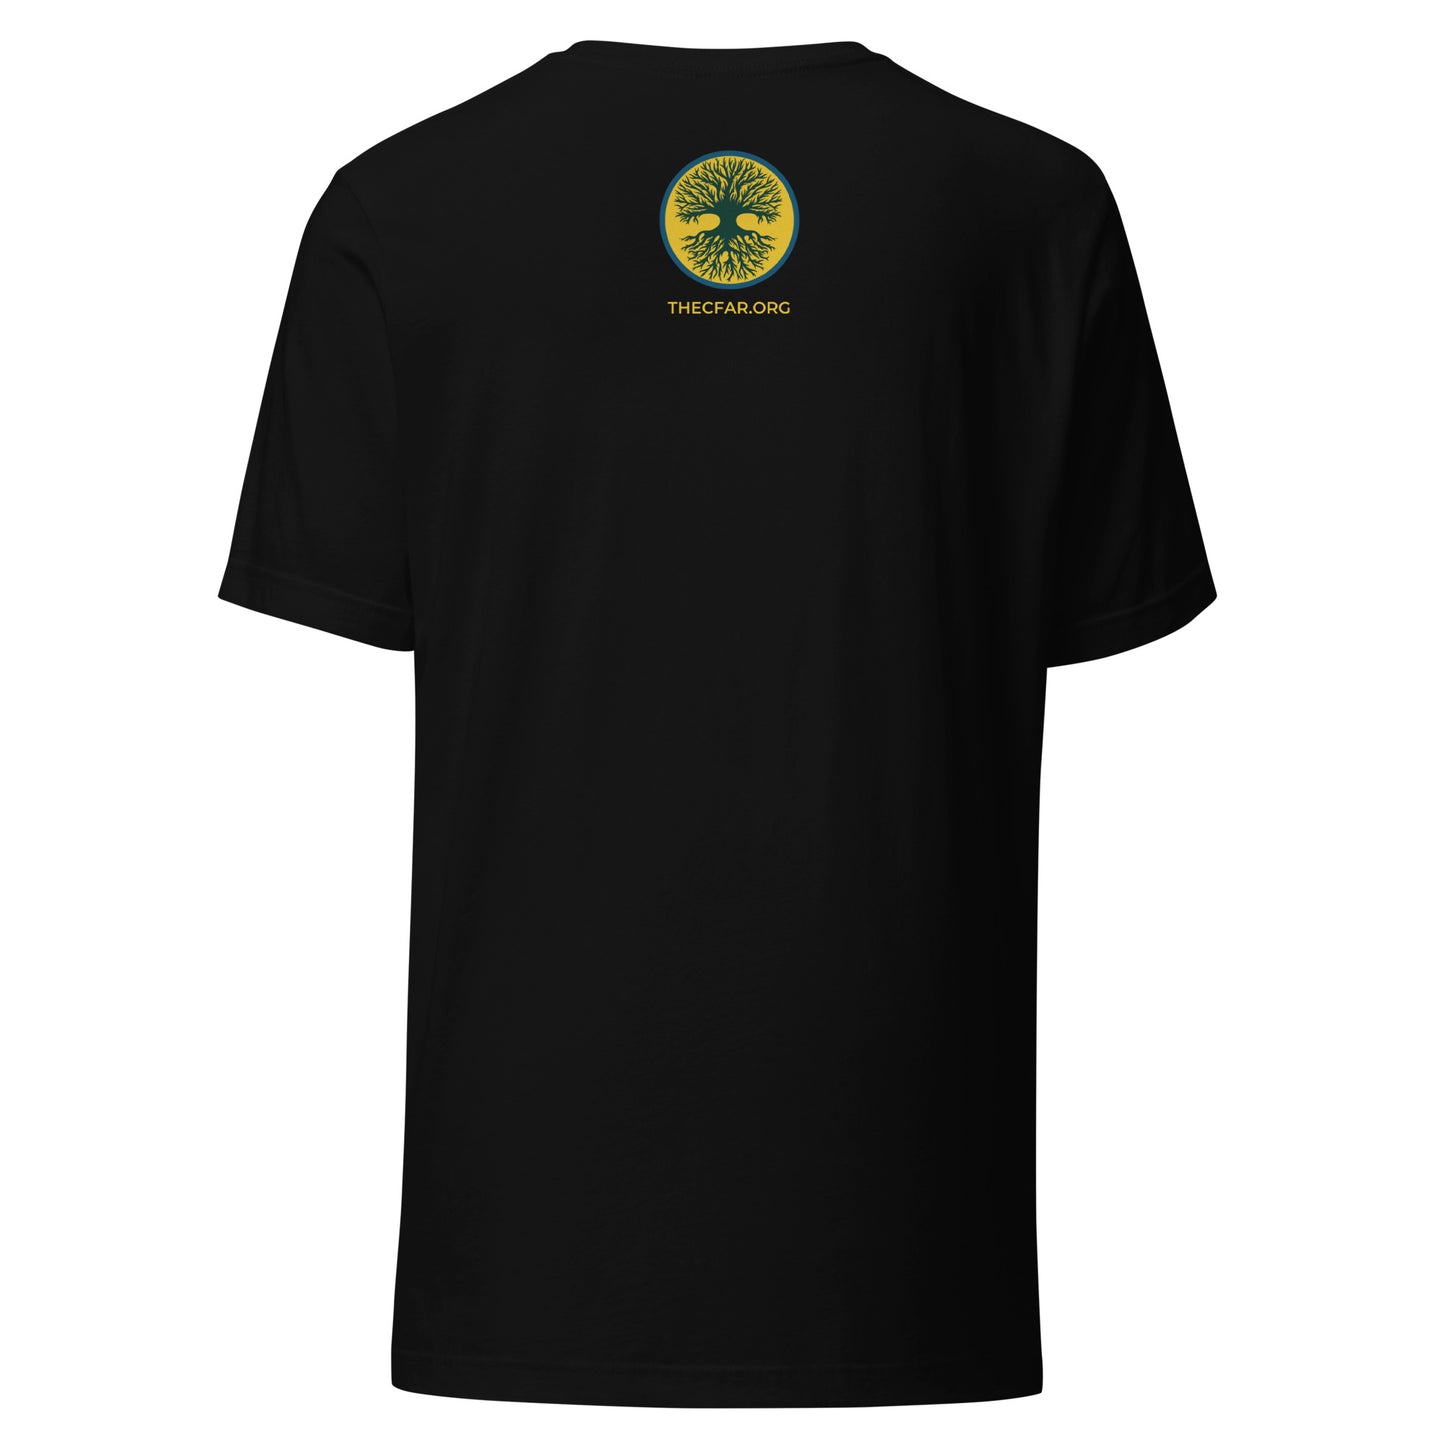 Rooted In Regeneration - Roots T-Shirt